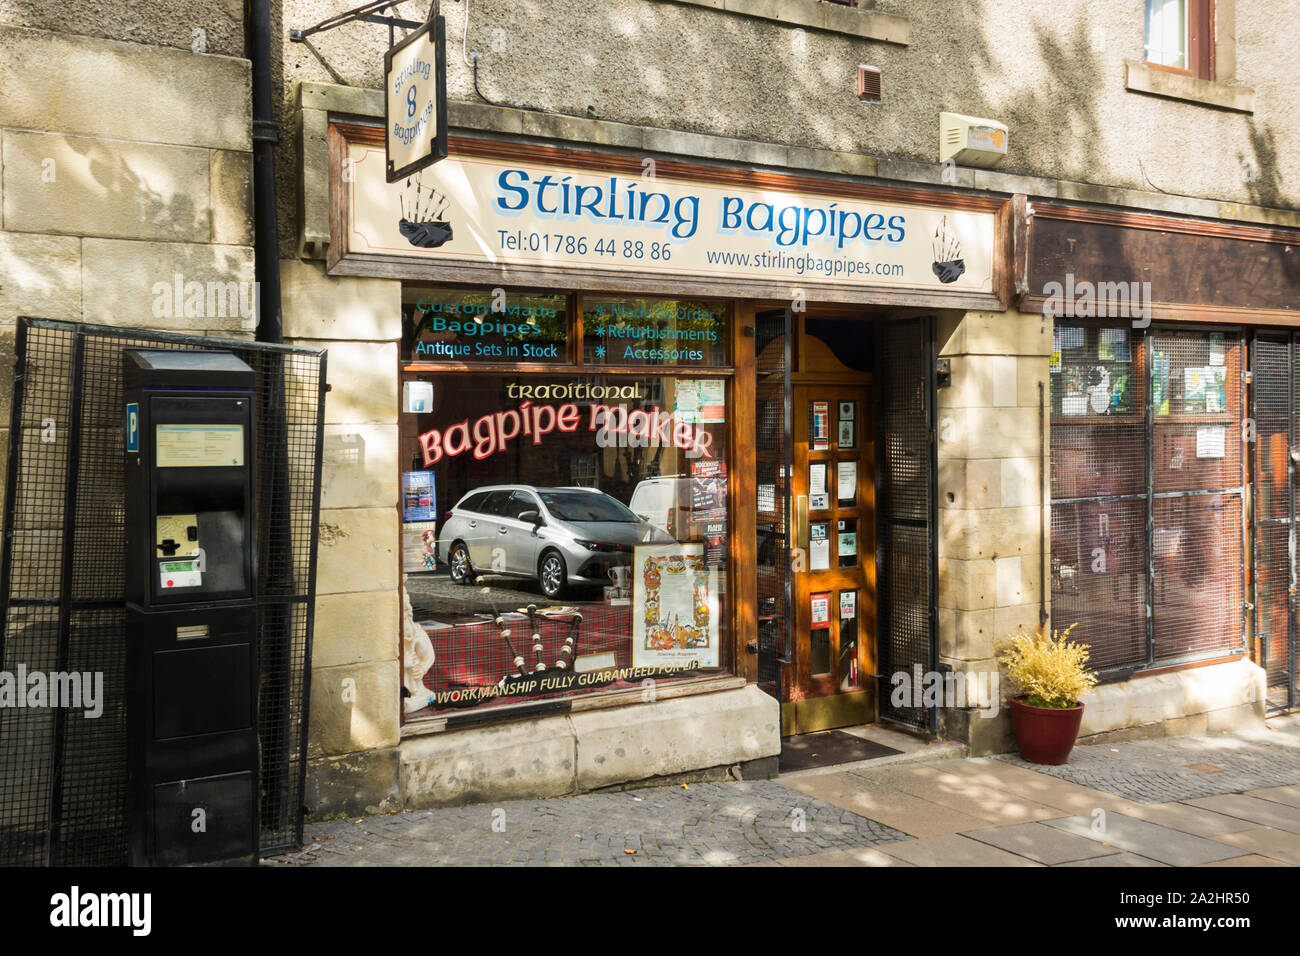 Stirling bagpipes shop on Broad Street, Stirling, Scotland. Stock Photo